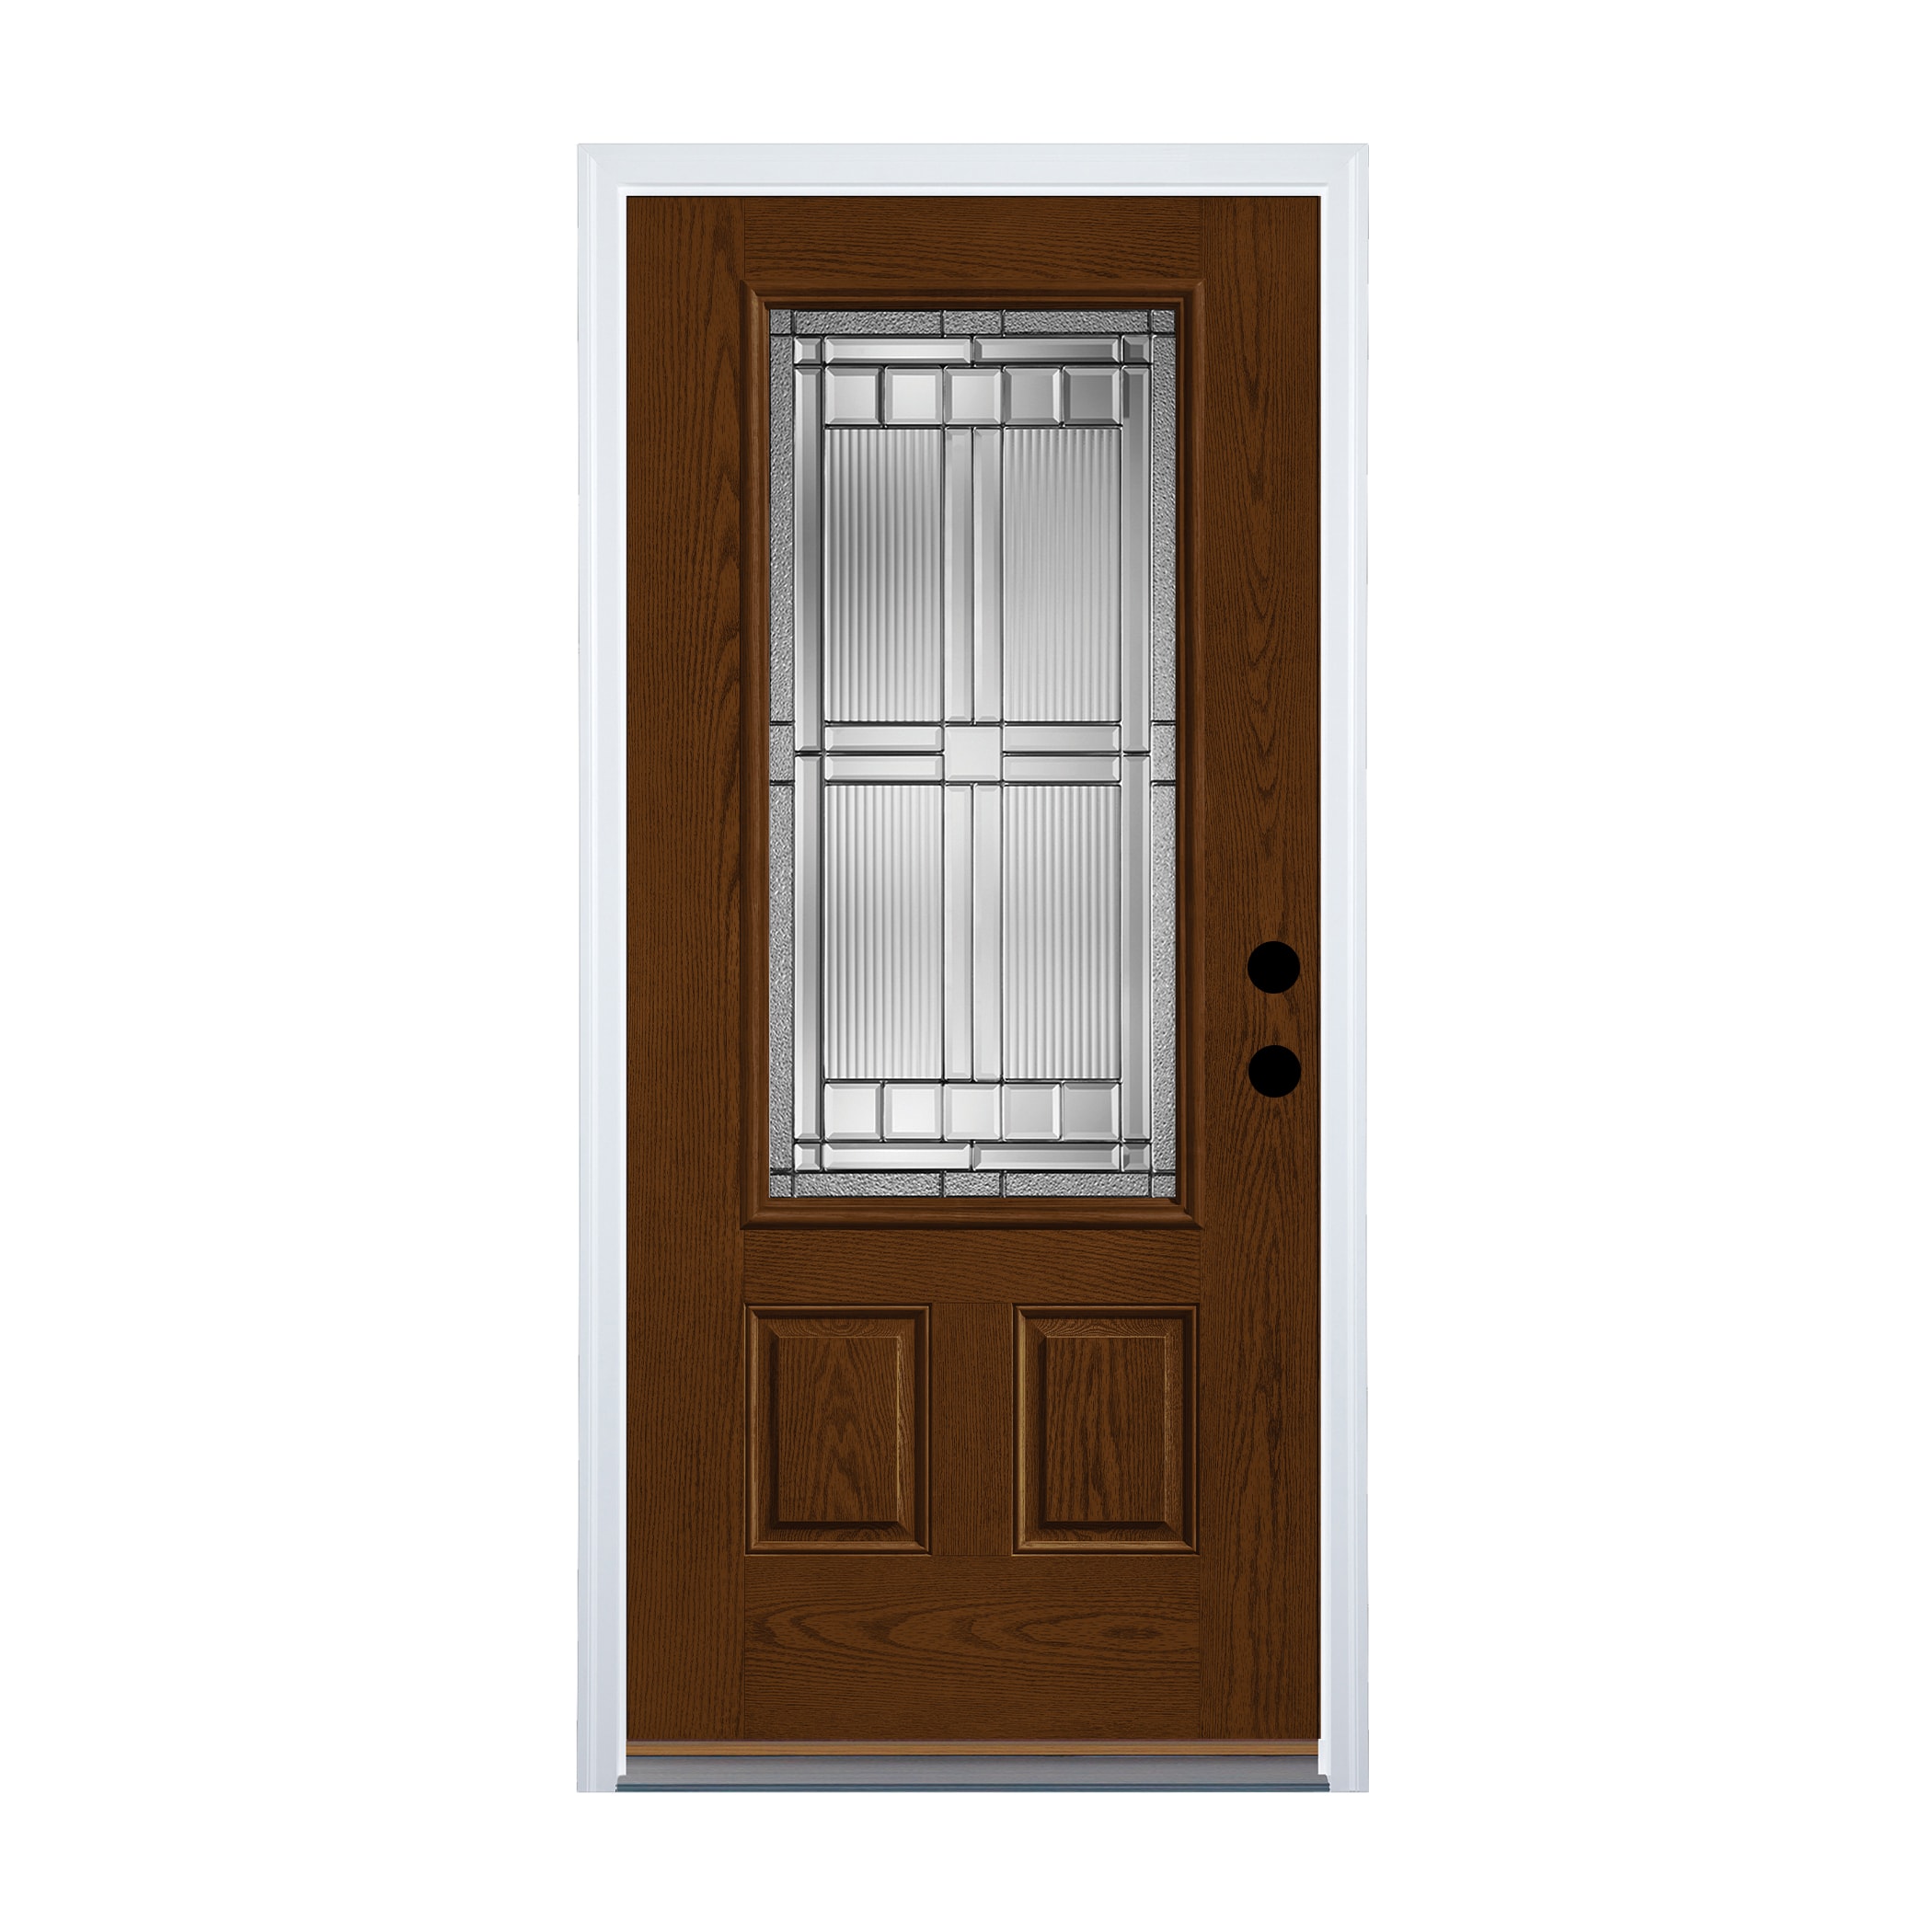 Fiberglass 3/4 Lite Right-Hand Outswing New Earth Stained Single Front Door with Brickmould Insulating Core in Brown/Tan | - Therma Tru FC776H-I-RON5-NE